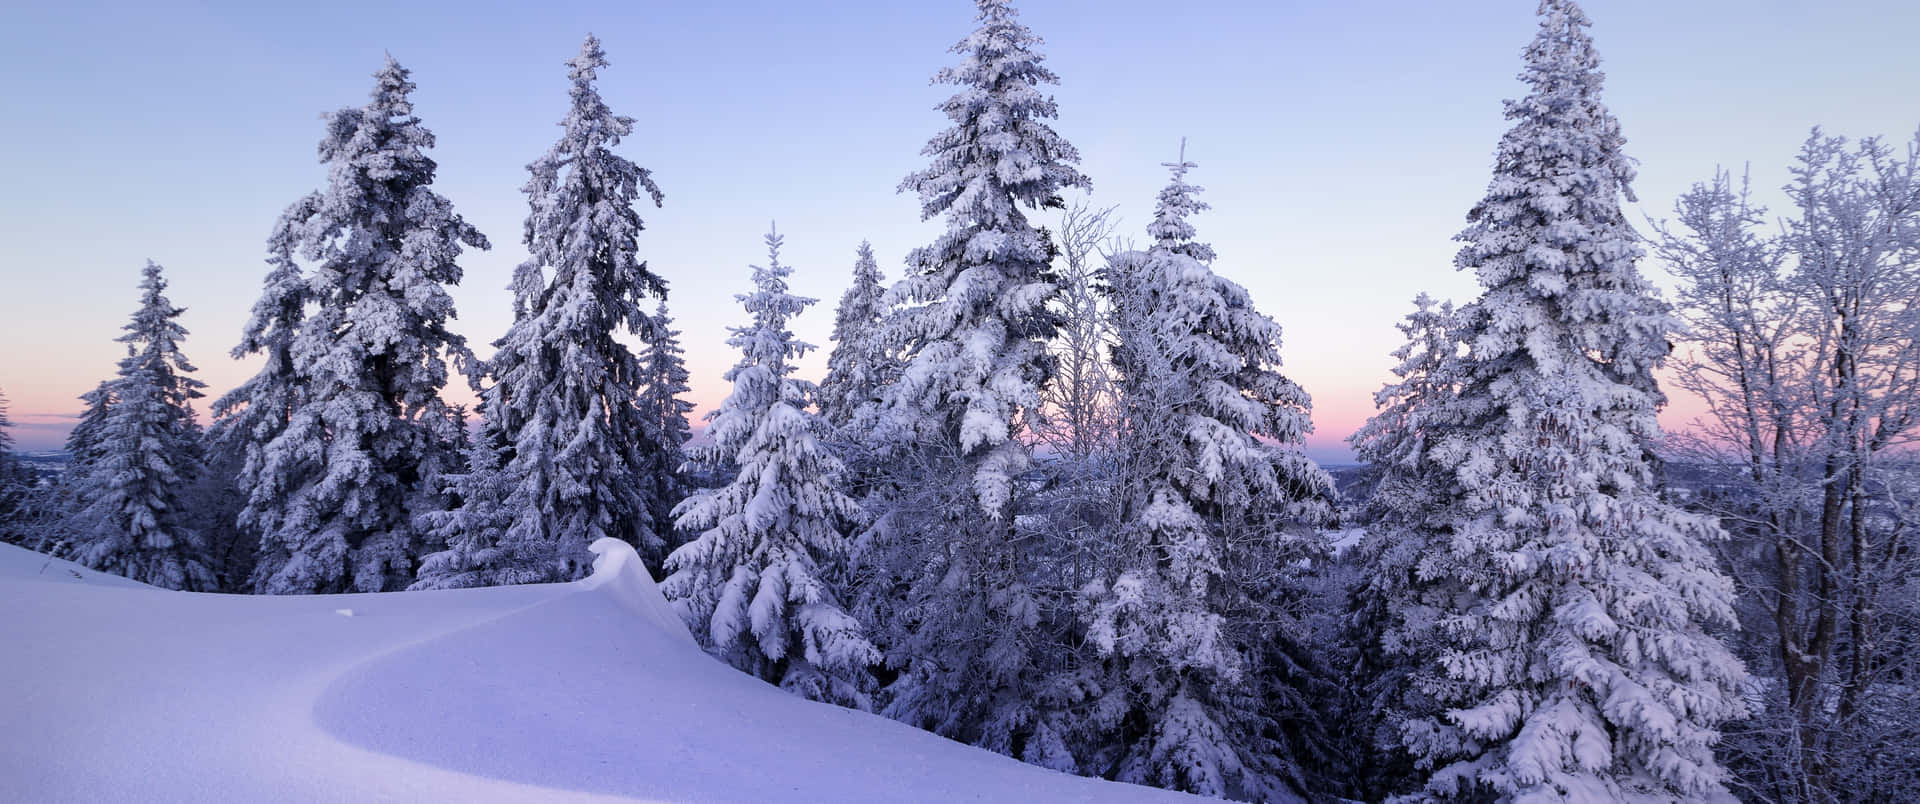 a snow covered forest at sunset